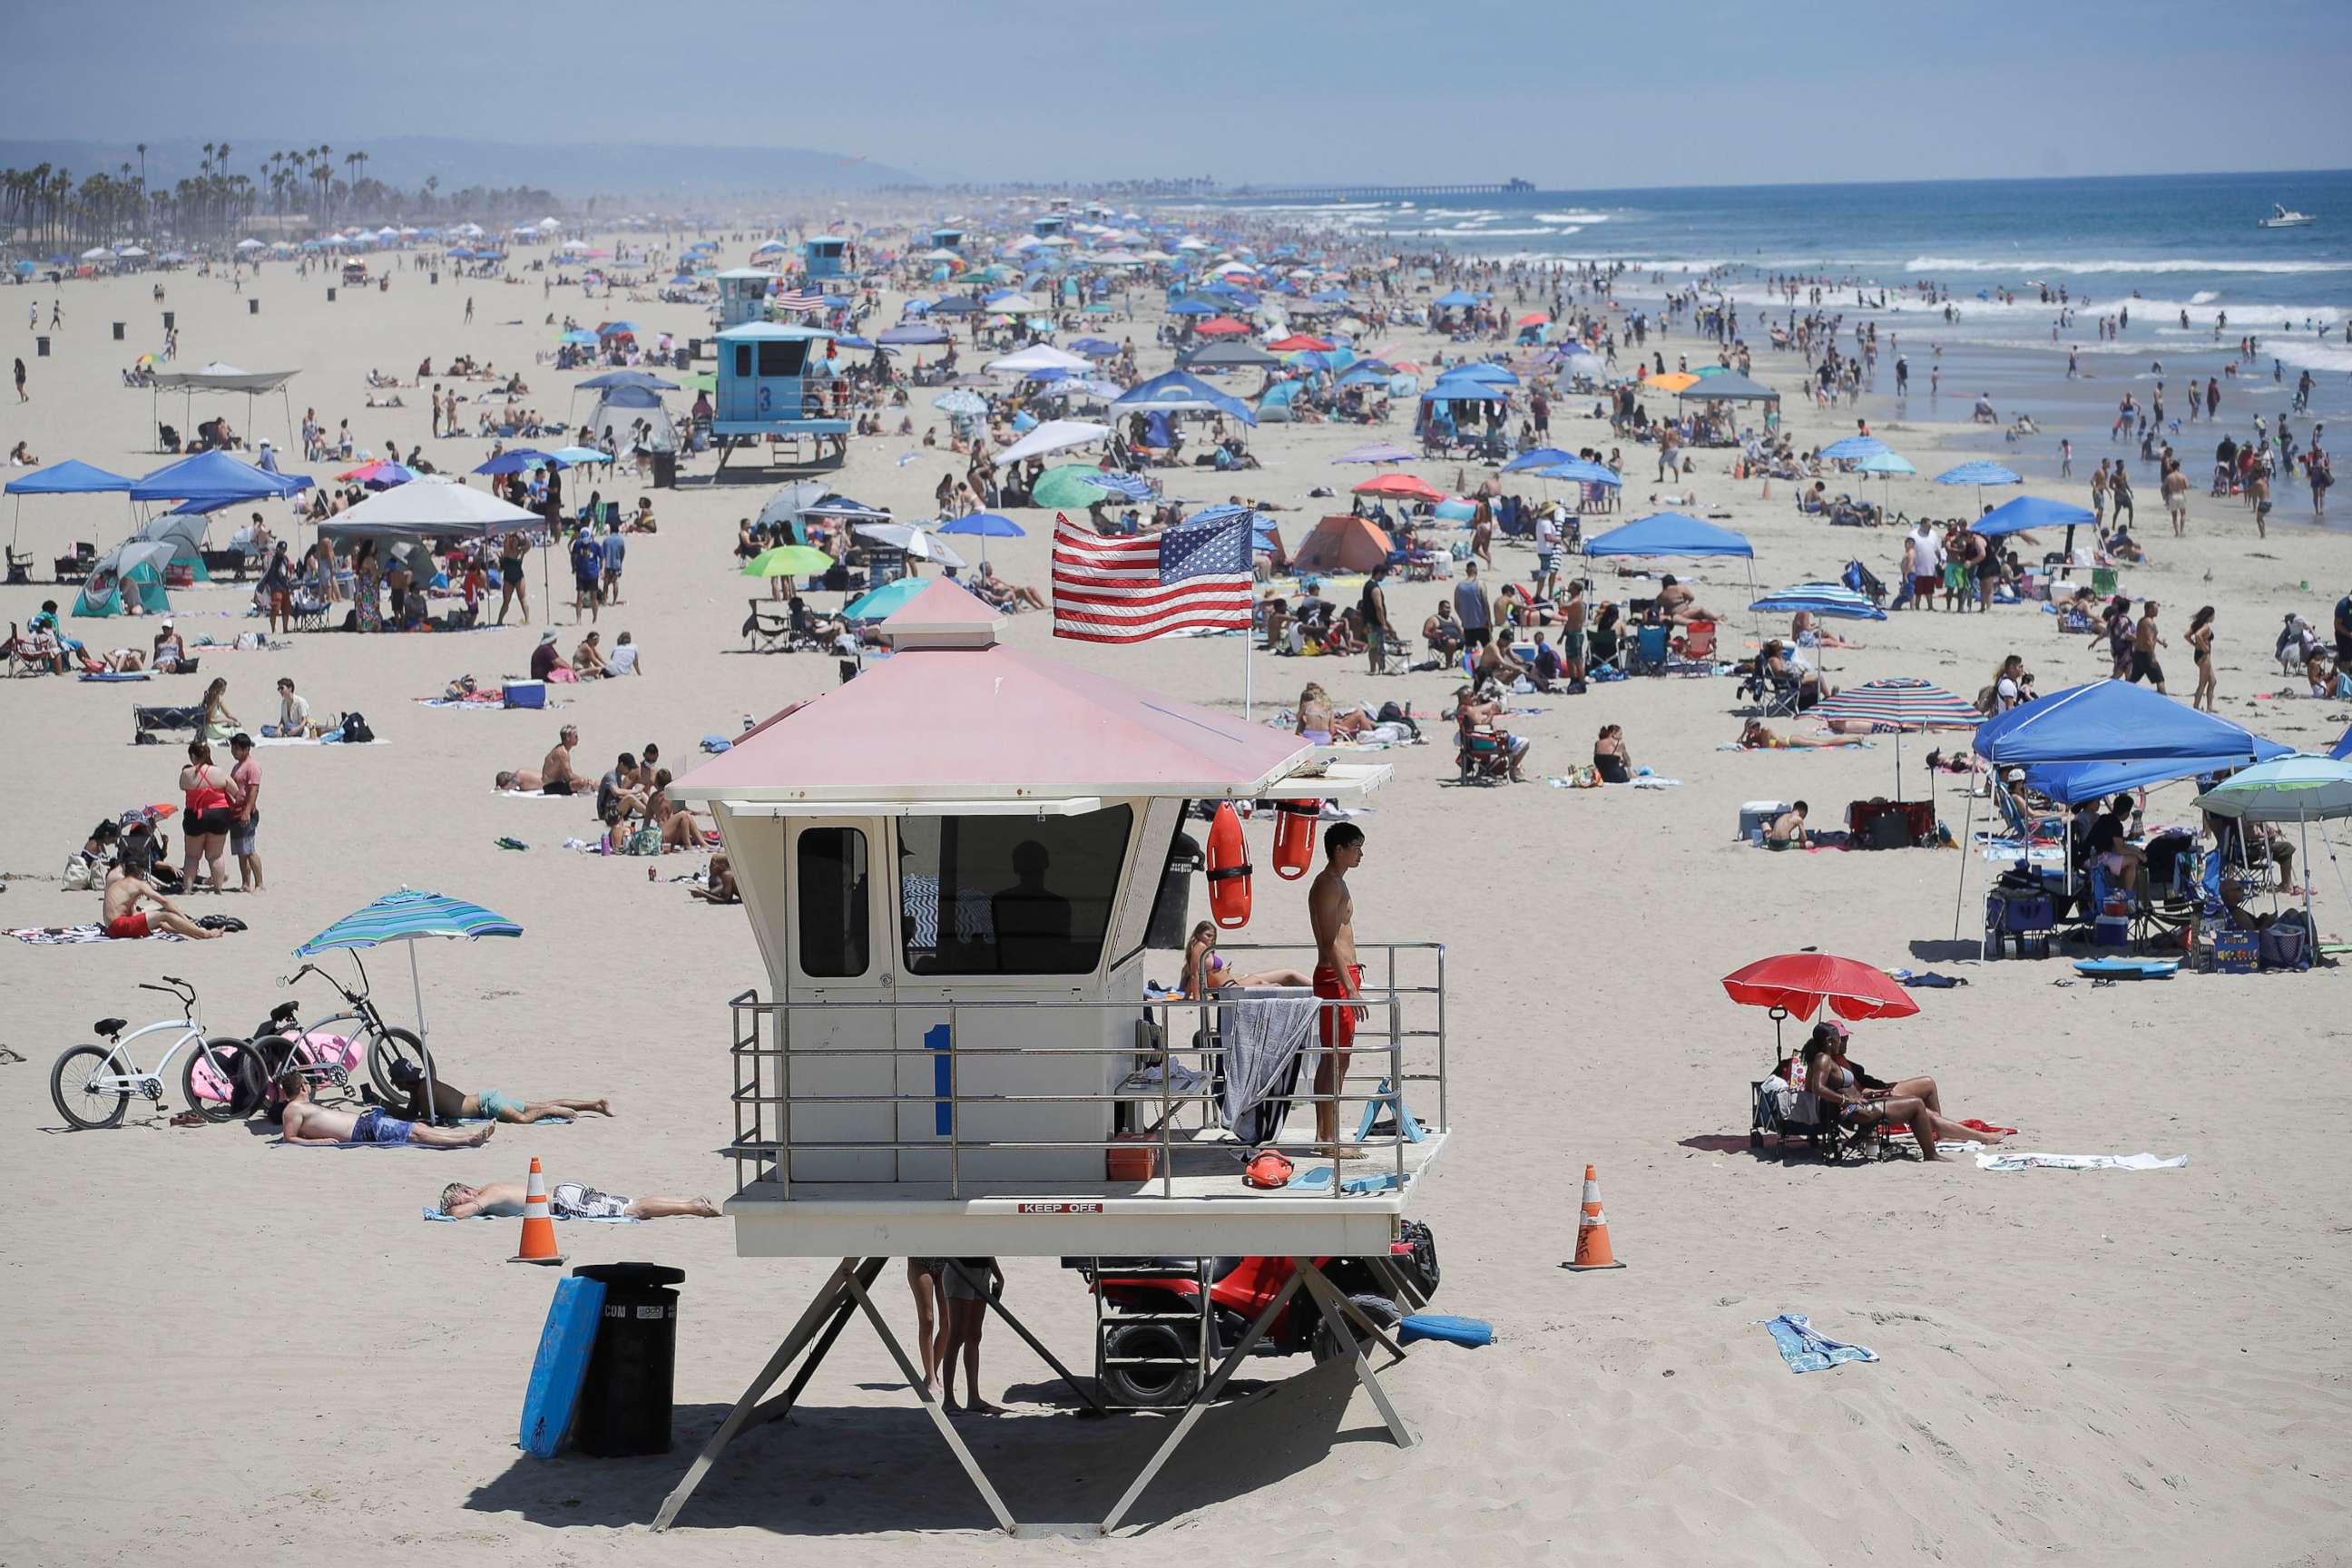 PHOTO: A lifeguard keeps watch over a packed beach in Huntington Beach, Calif., June 29, 2020.